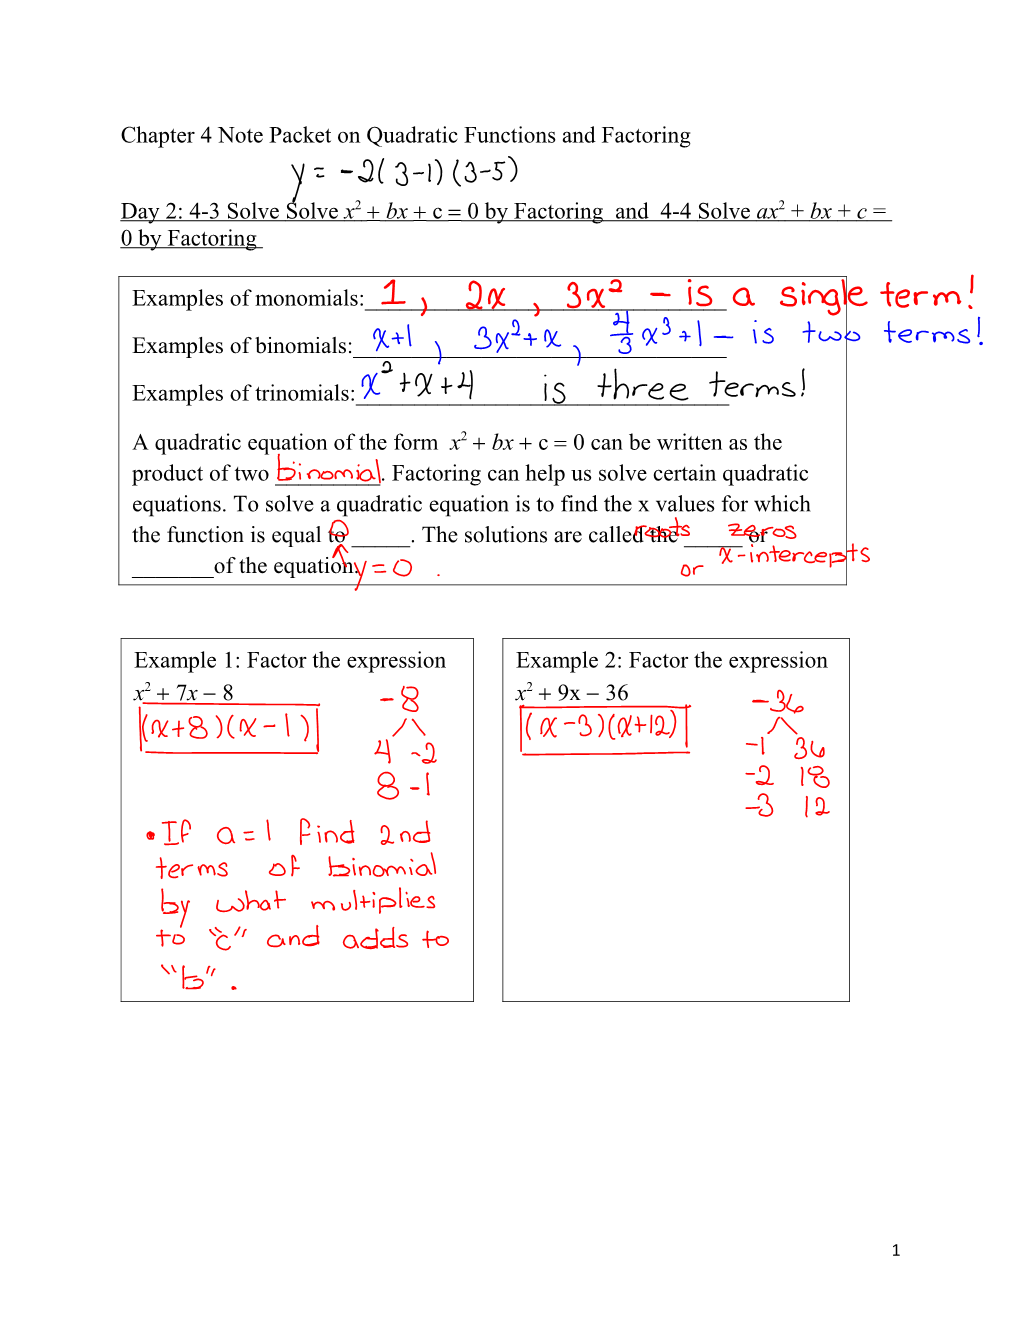 Chapter 4 Note Packet on Quadratic Functions and Factoring